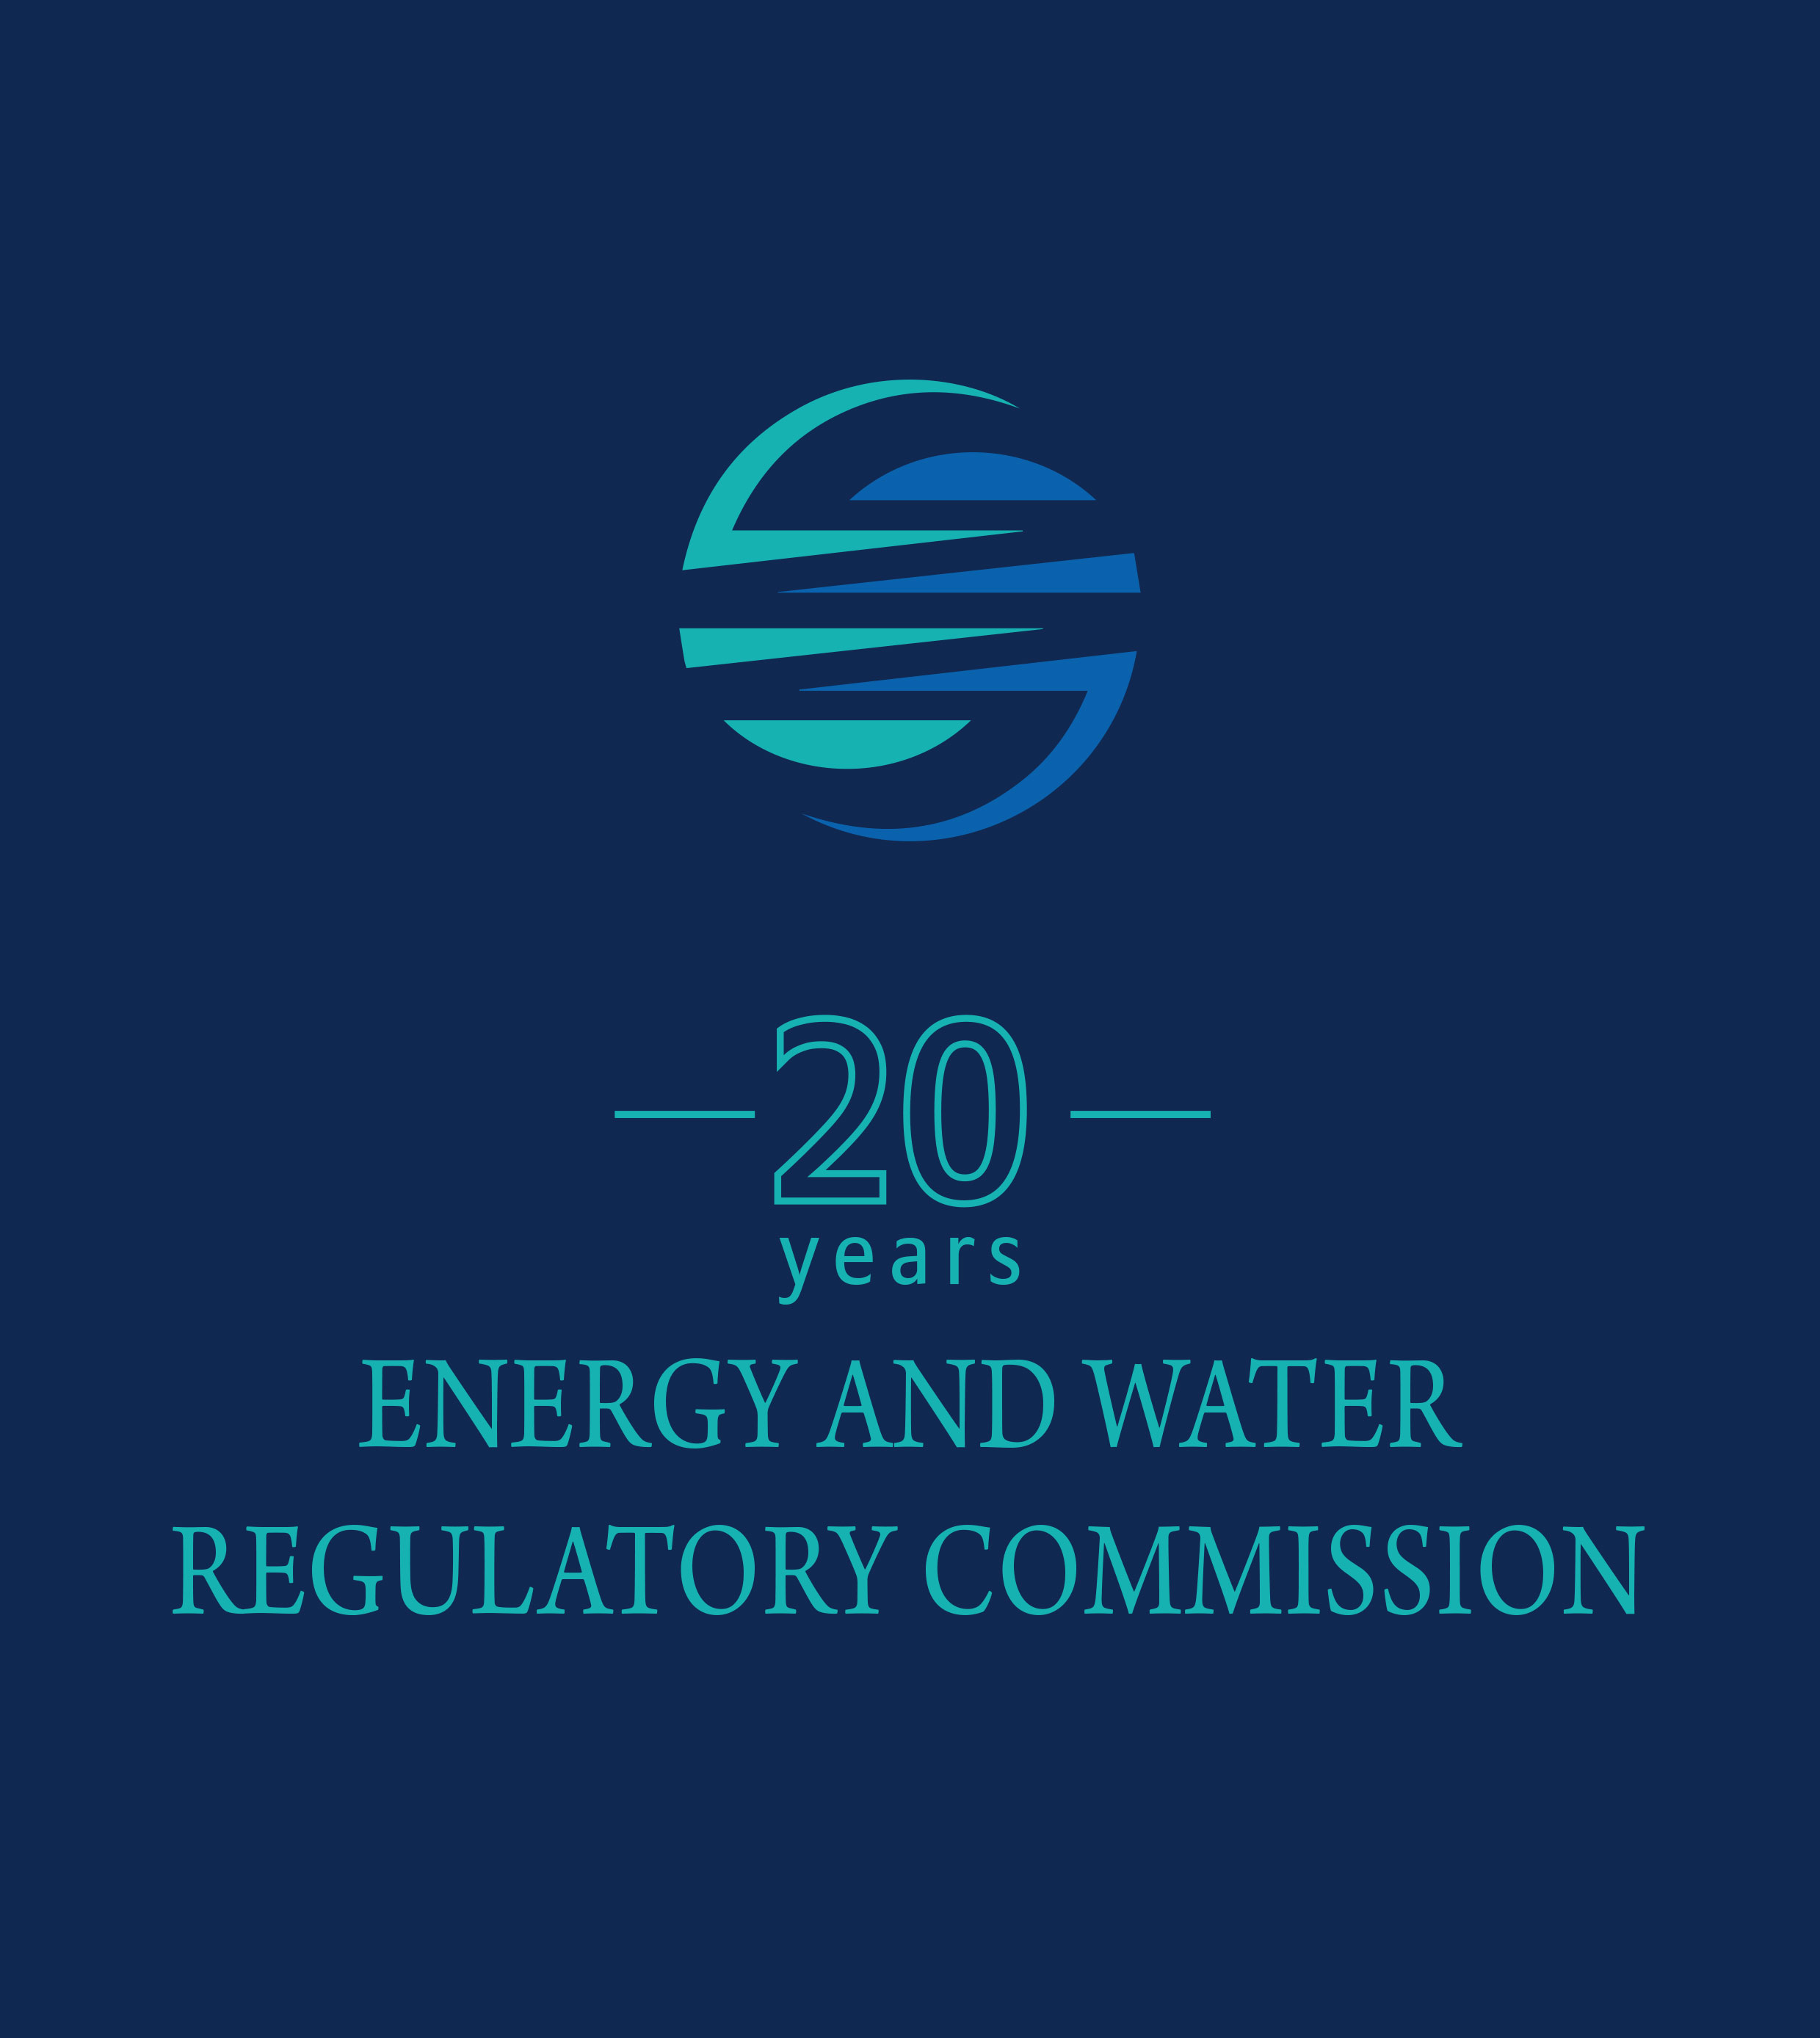 Energy and water regulatory commission